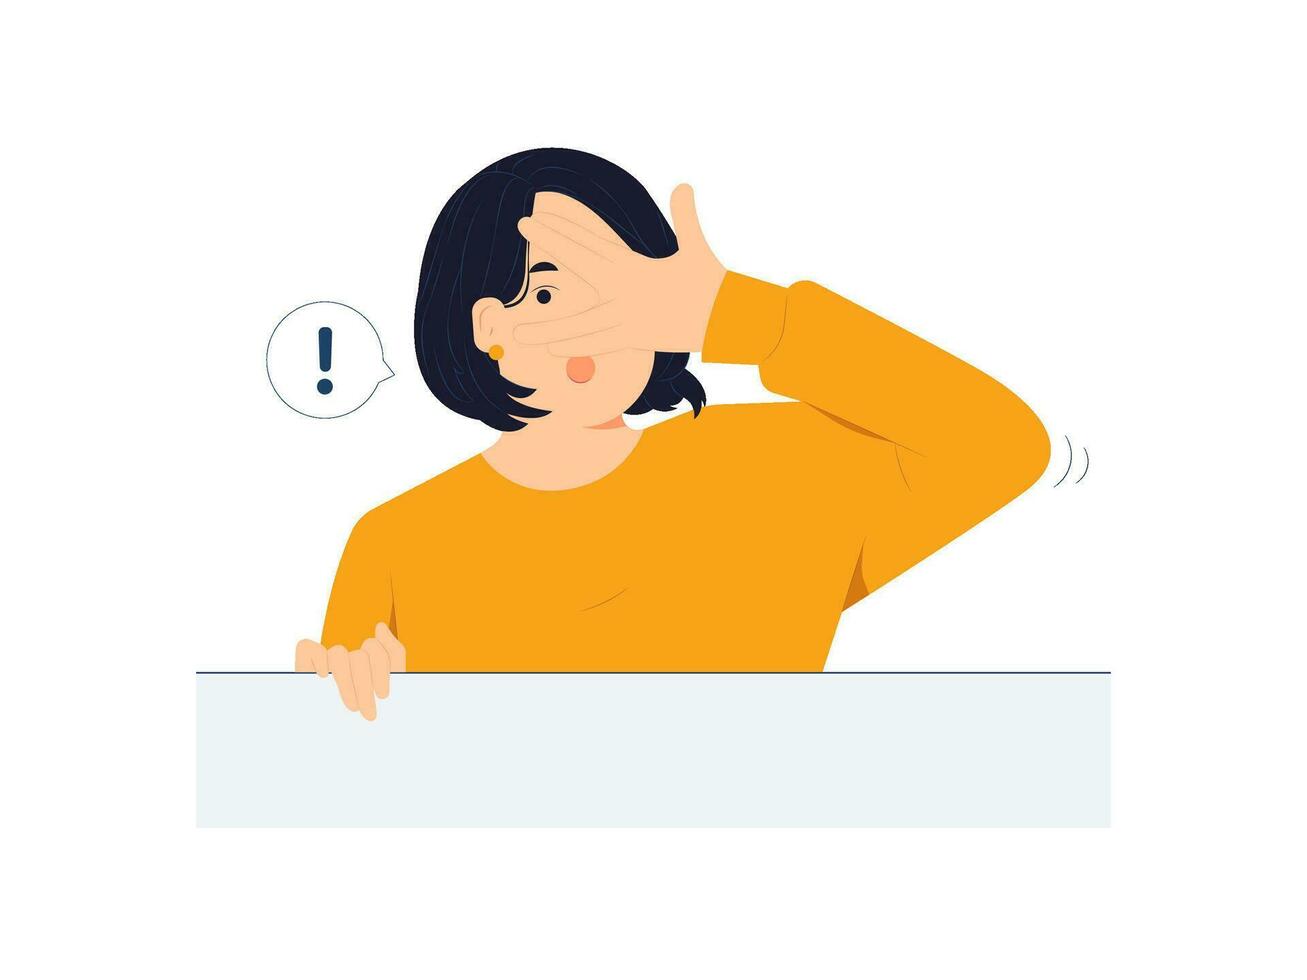 Young woman peeking in shock covering face and eyes with hand, looking through fingers with embarrassed expression, curiosity, startled, shocked, surprised, peeping, discovery concept illustration vector